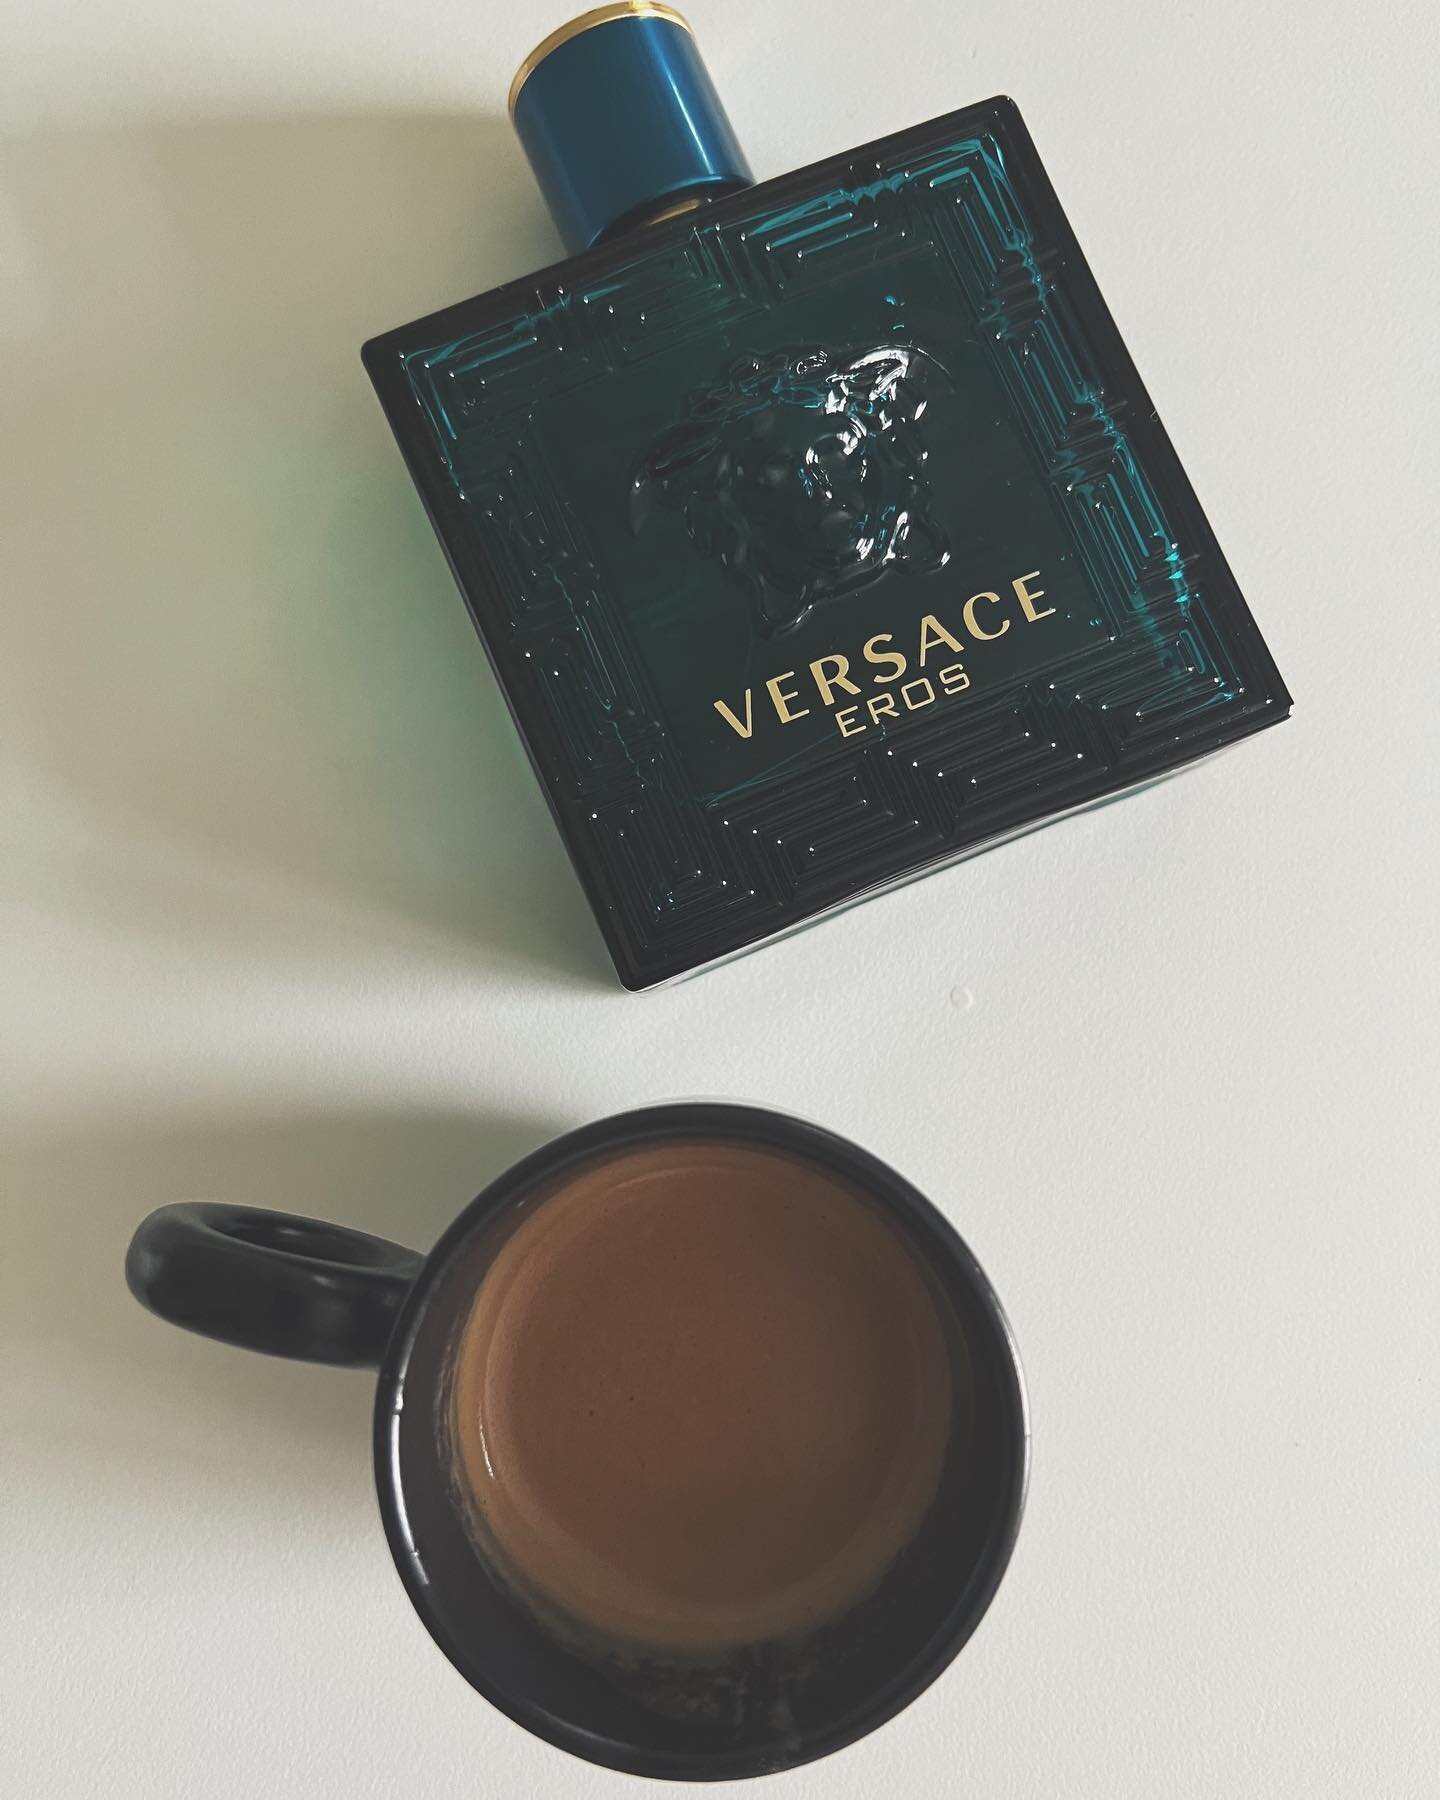 When you are proud of your half Italian side.
@versace @lavazzauk 
A coffee before shopping and of course the timeless and sexy fragrance of #versaceeros 
My favourite coffee by @lavazzauk #amodomio 
#versace
#espresso #coffeeaddict #coffeetime #ital